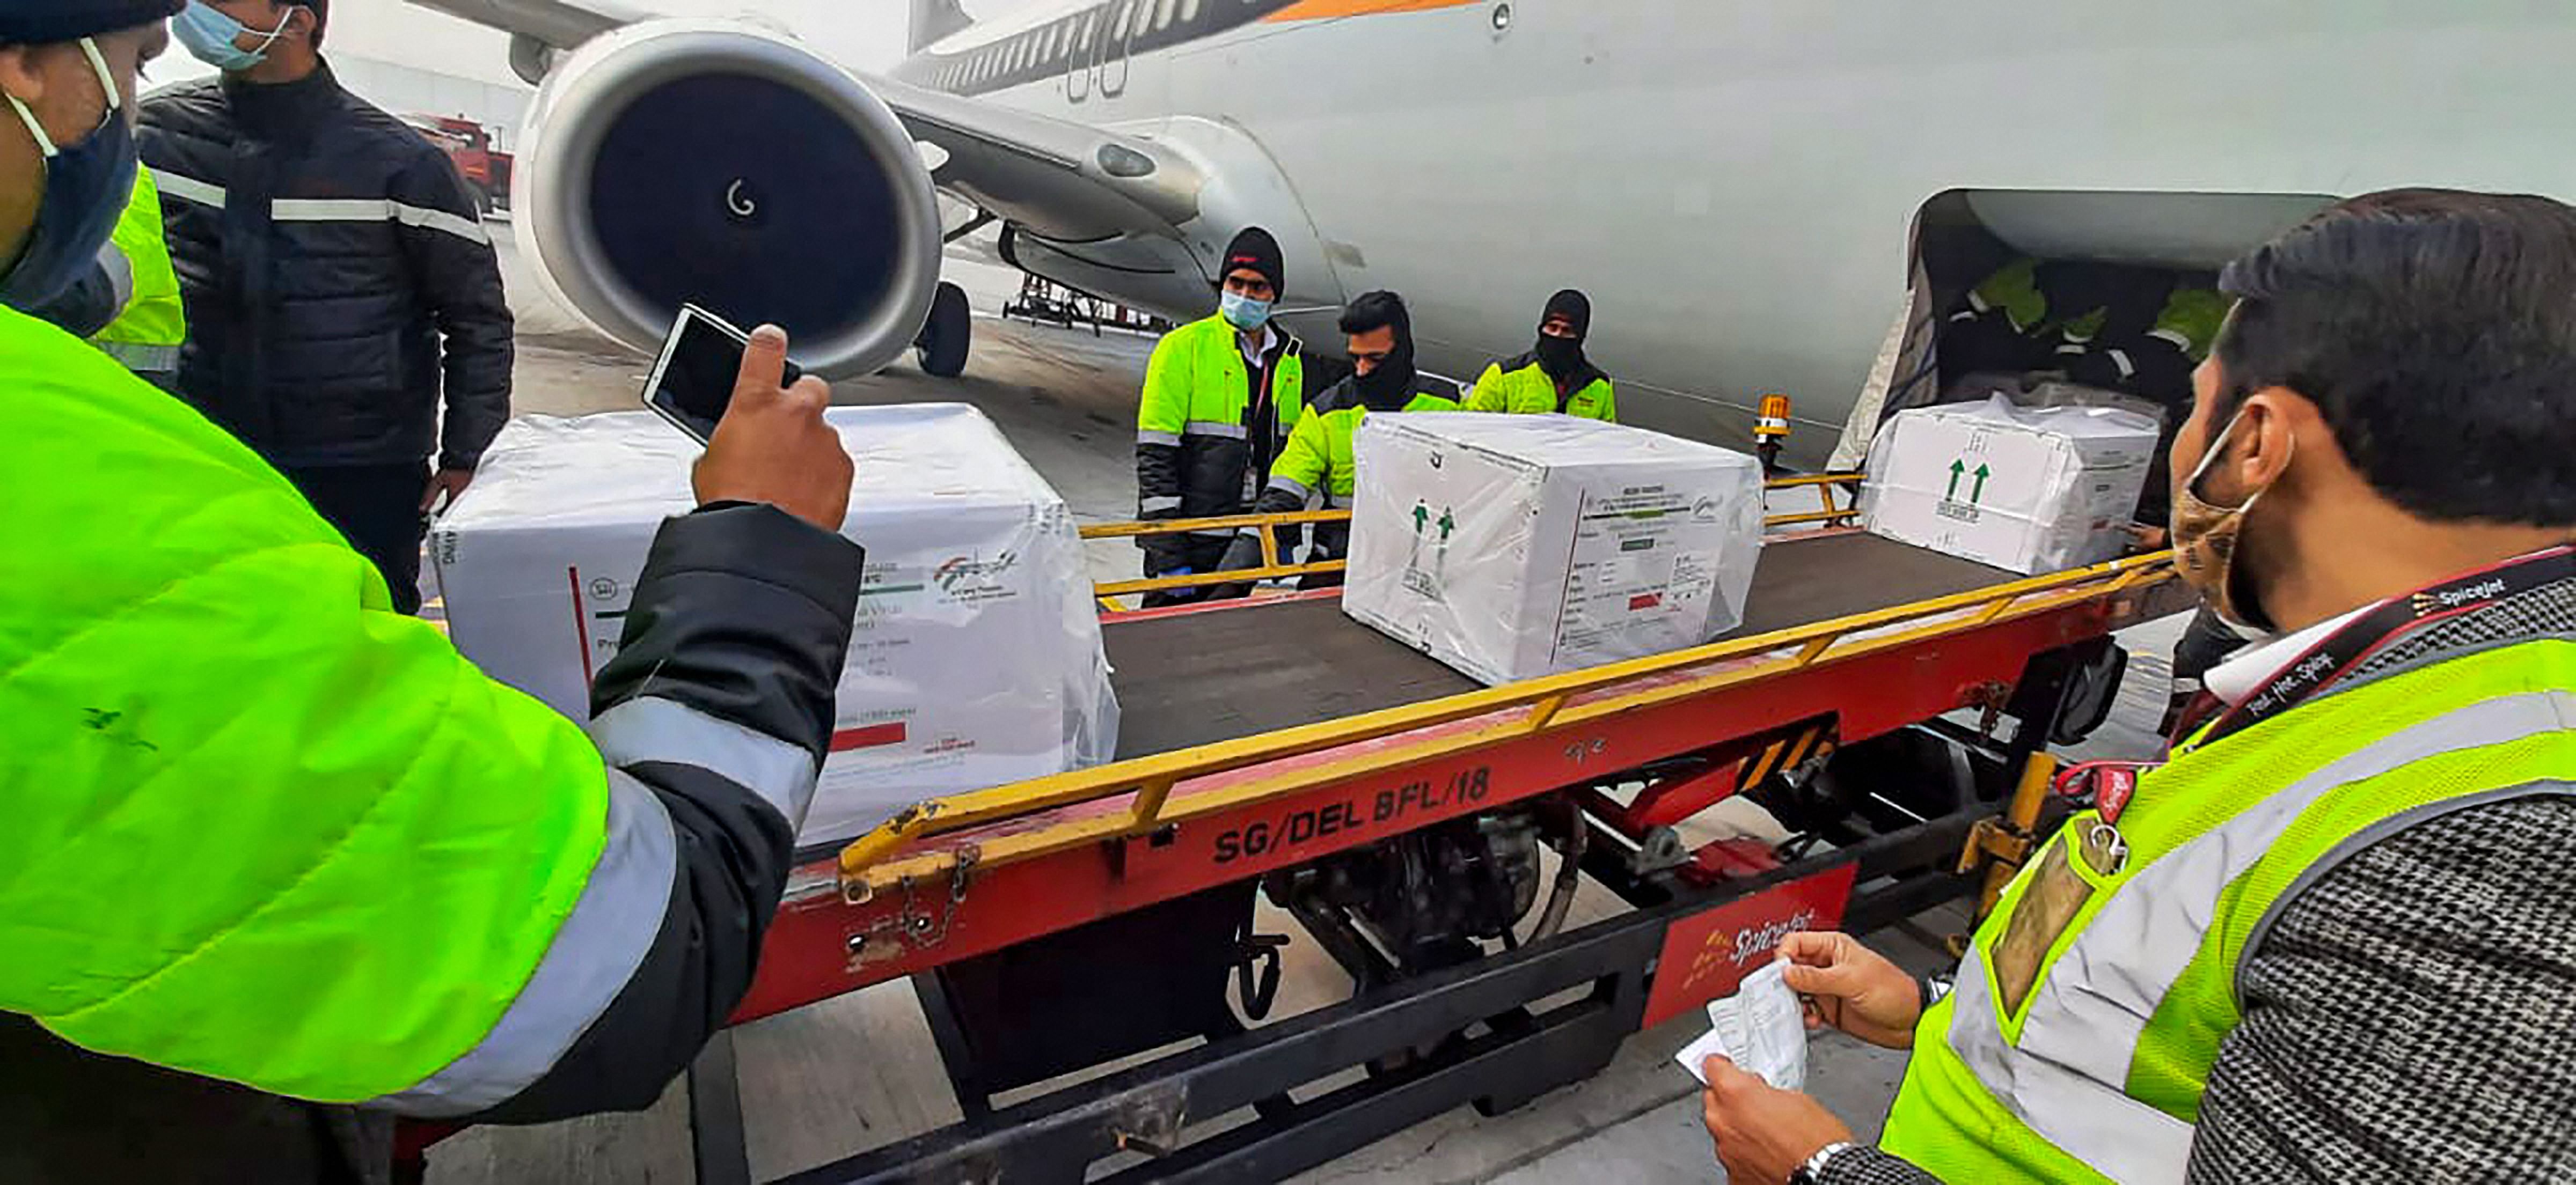 First consignment of Covid-19 vaccination arrives at Delhi Airport in a special SpiceJet flight from Pune. Credit: PTI Photo